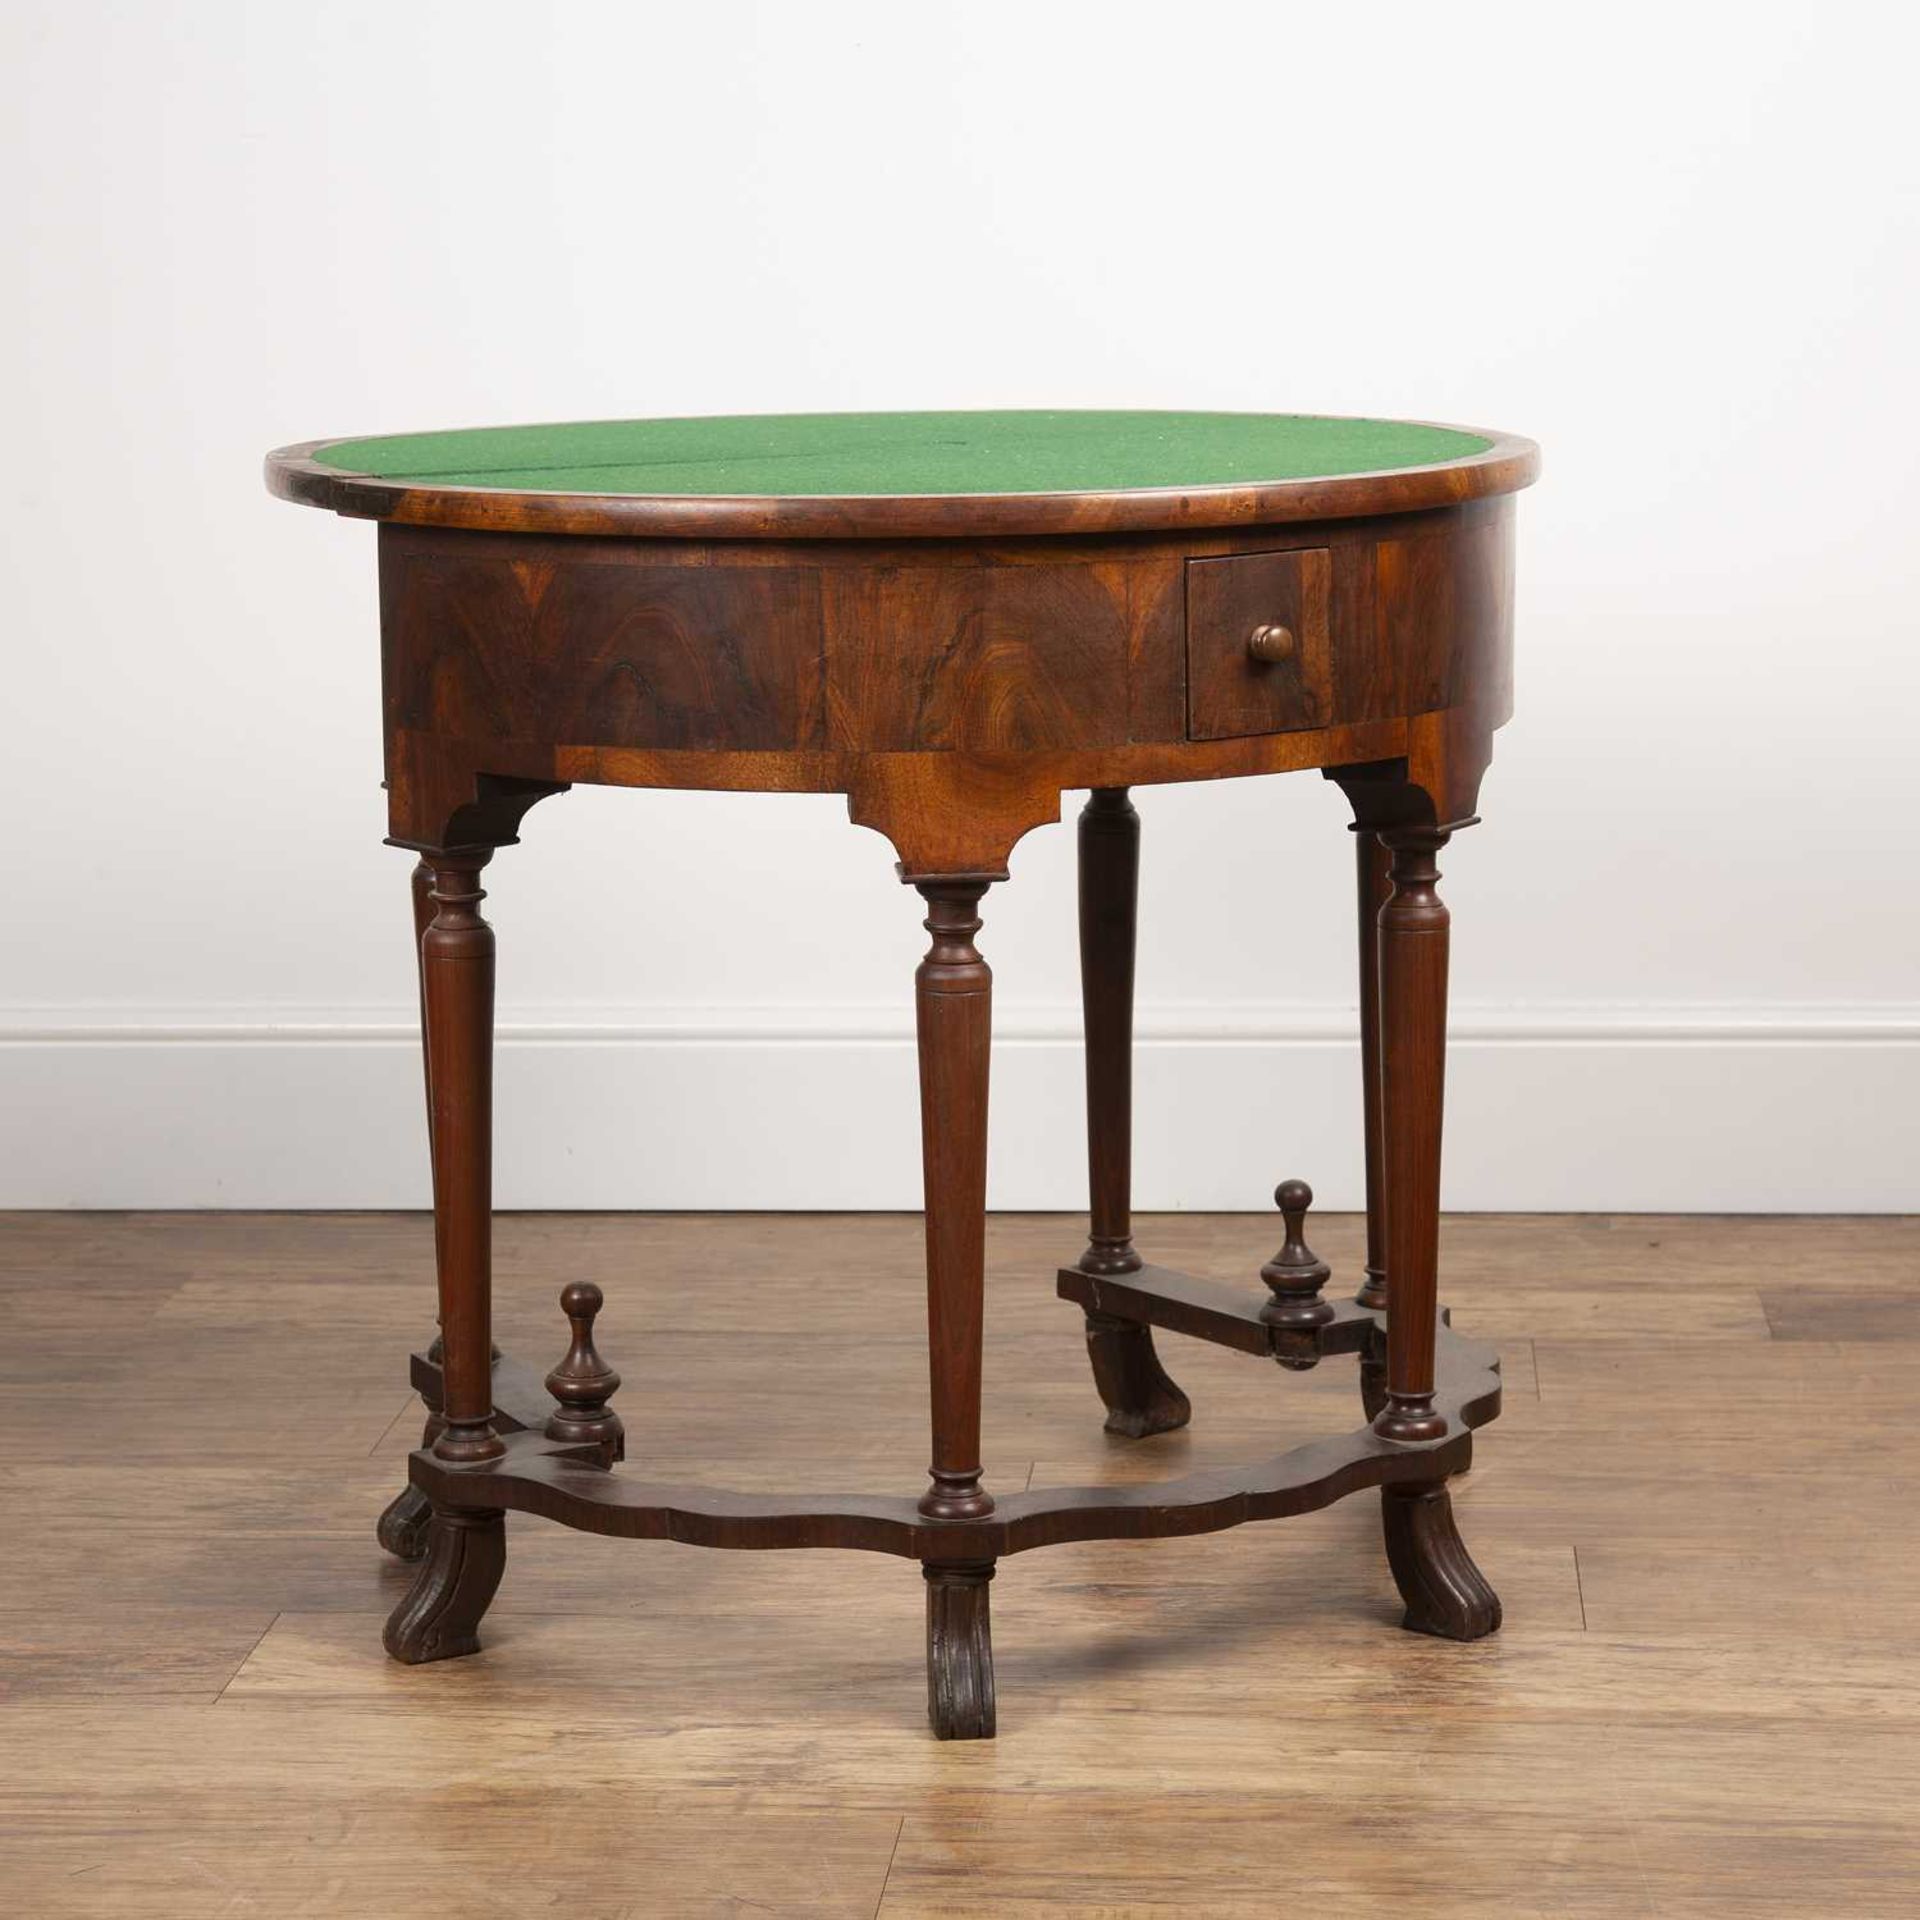 Quarter veneered walnut demi-lune card table Queen Anne style with inset baize on turned support and - Image 2 of 6